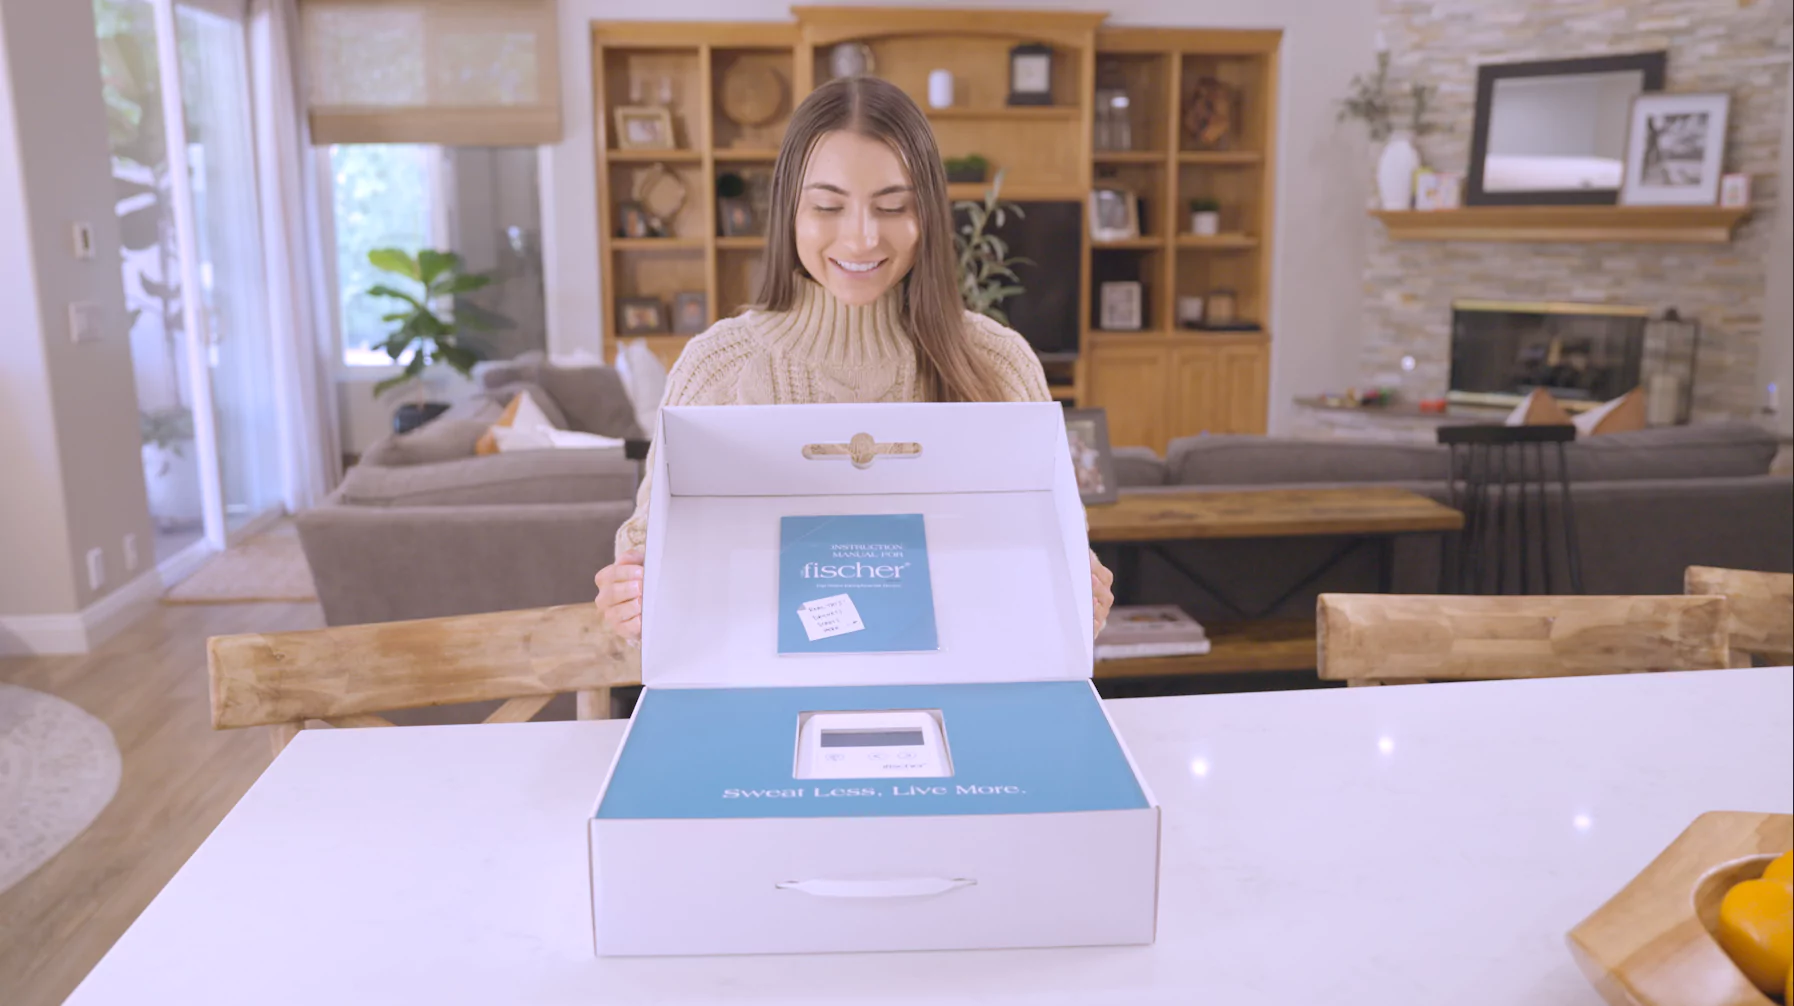 A young woman with brown hair standing at a table in a cozy-looking home. She is smiling and opening a box for RA Fischer Co.'s "The Fischer" iontophoresis device, made for treating hyperhidrosis (Excessive sweating).